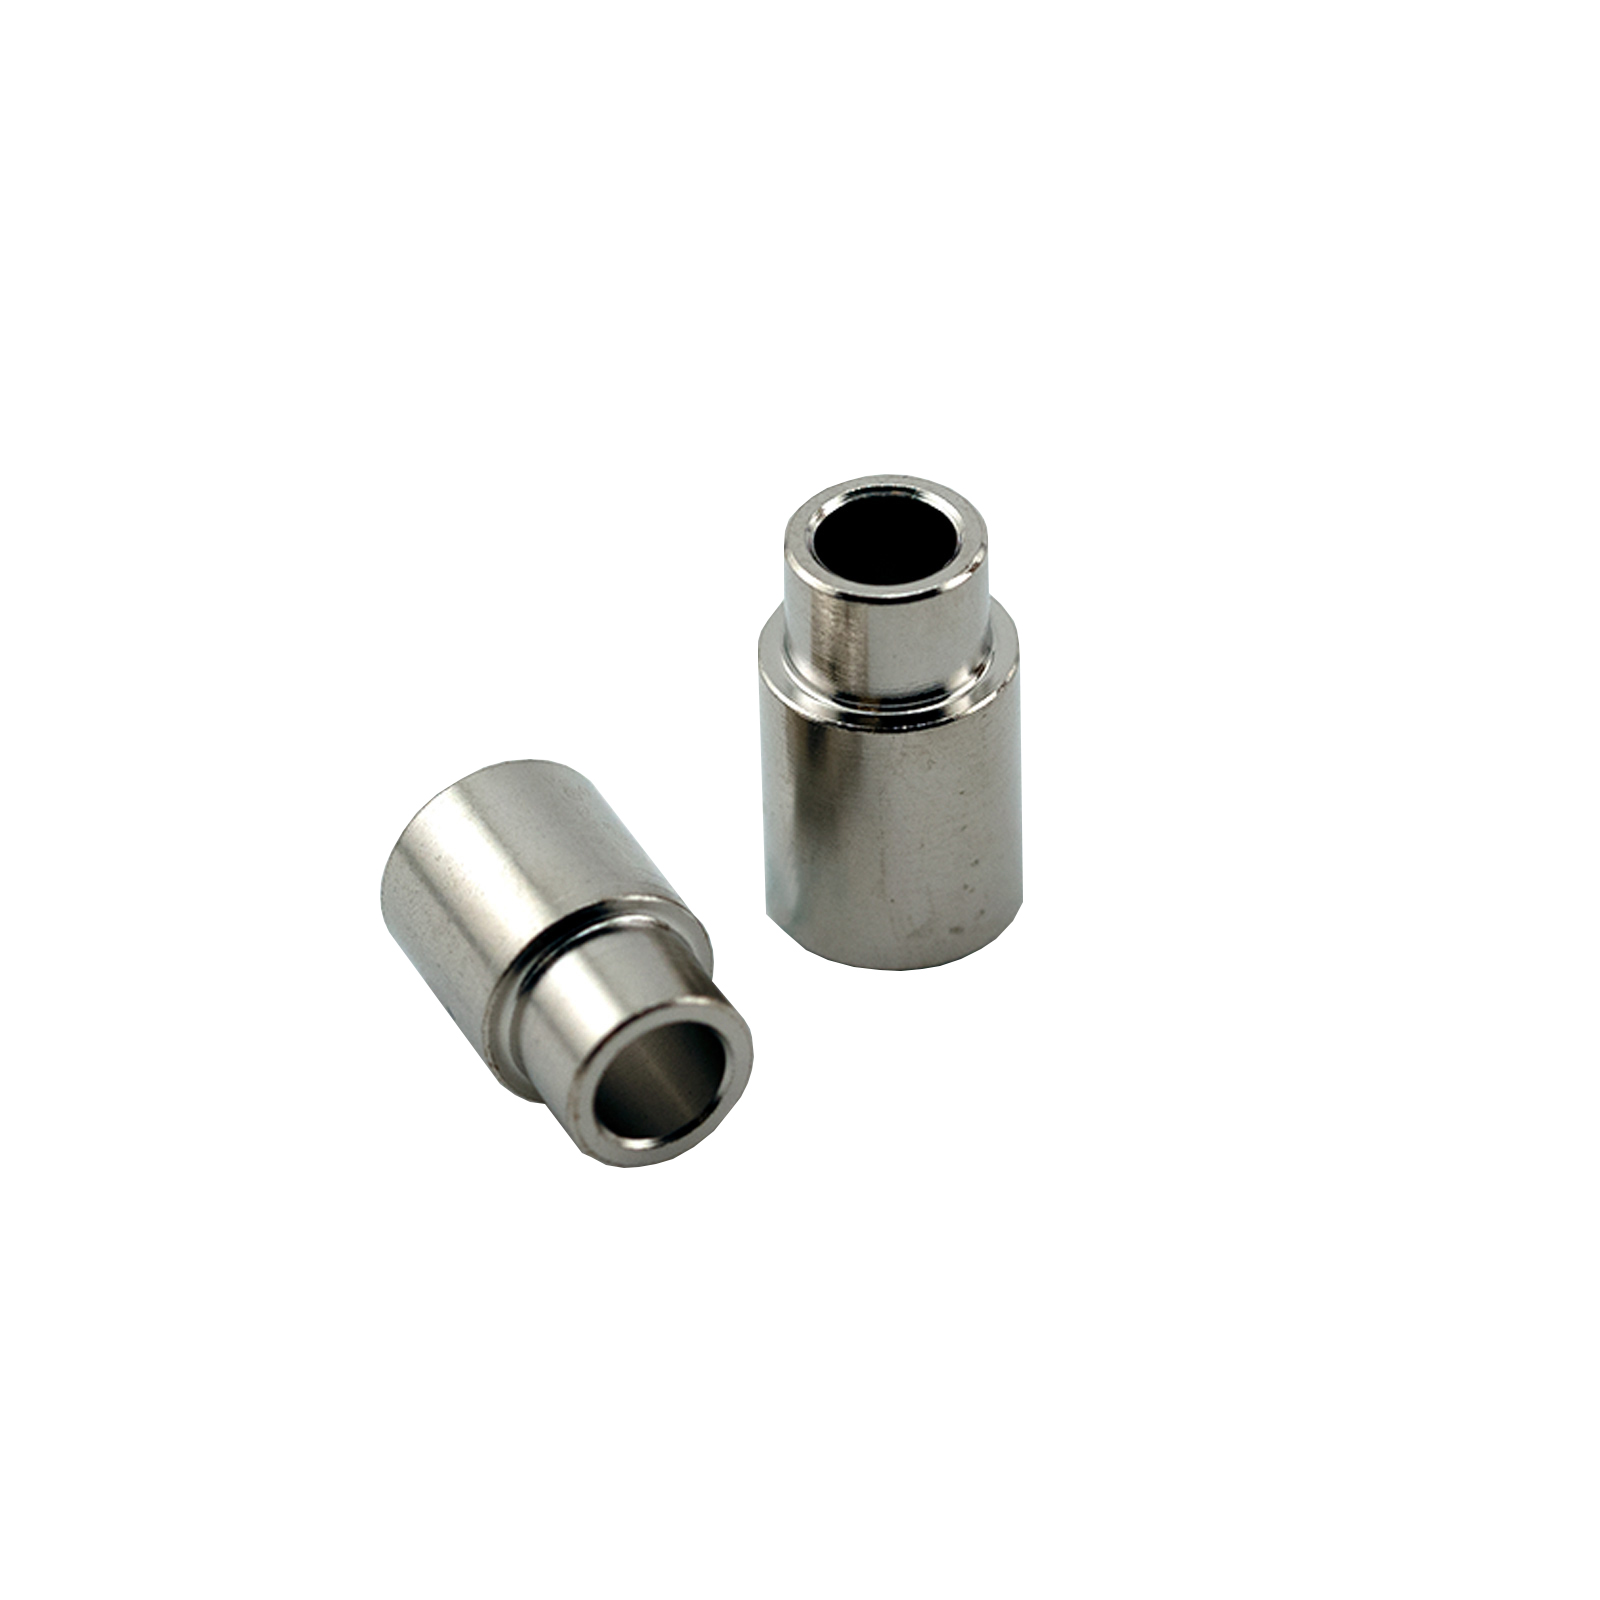 2pc Bushings for Chalk Holder Kits at Penn State Industries